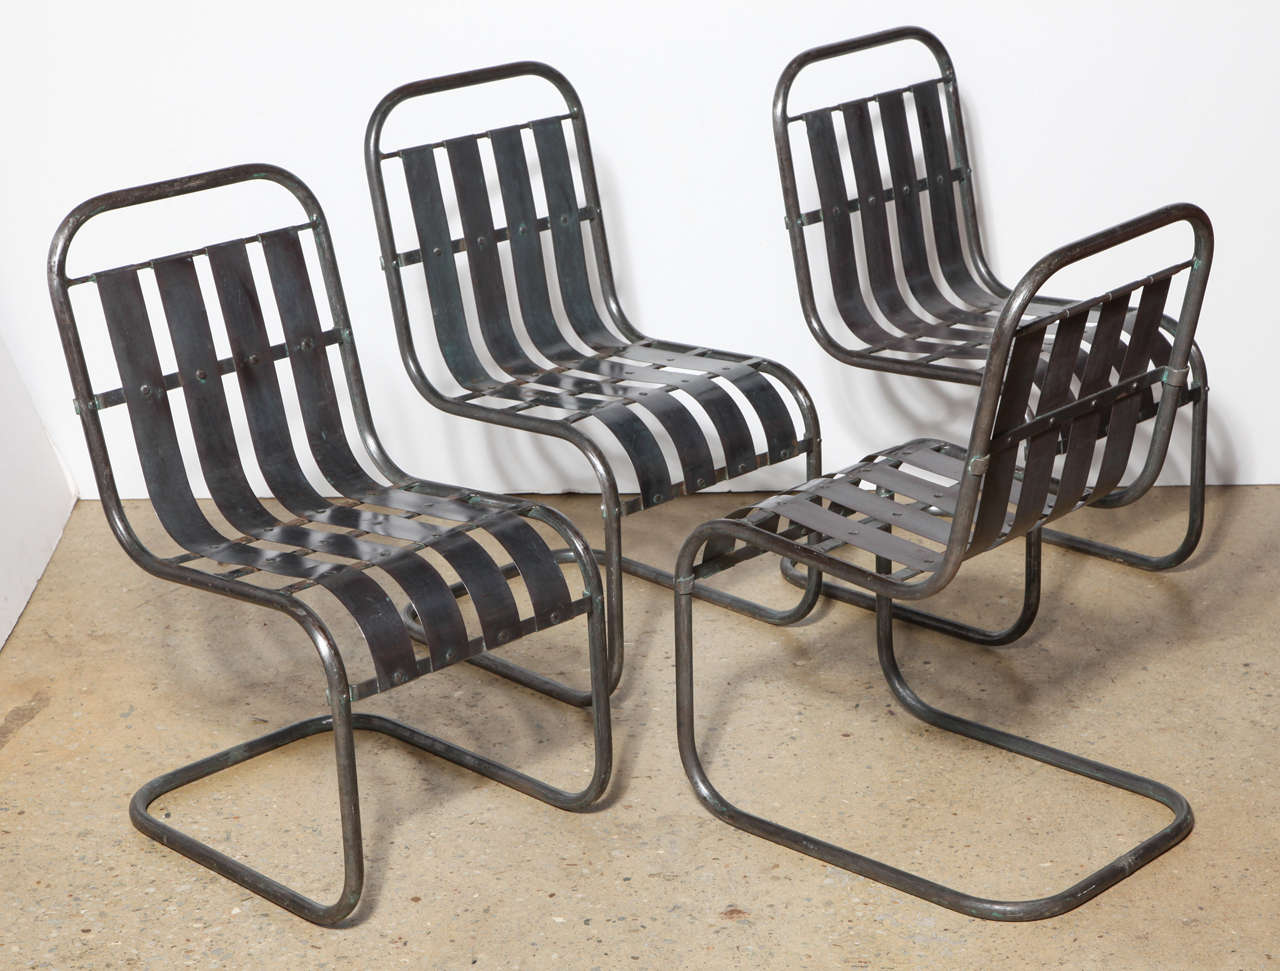 Modern Industrial Set of 4 Steel Spring Rocking Side Chairs. Featuring heavily riveted tubular bent Steel. Smooth rocking movement.  Comfortable. Porch. Veranda. Pool House. For use in covered area, with or without cushions. Paint removed. Standard